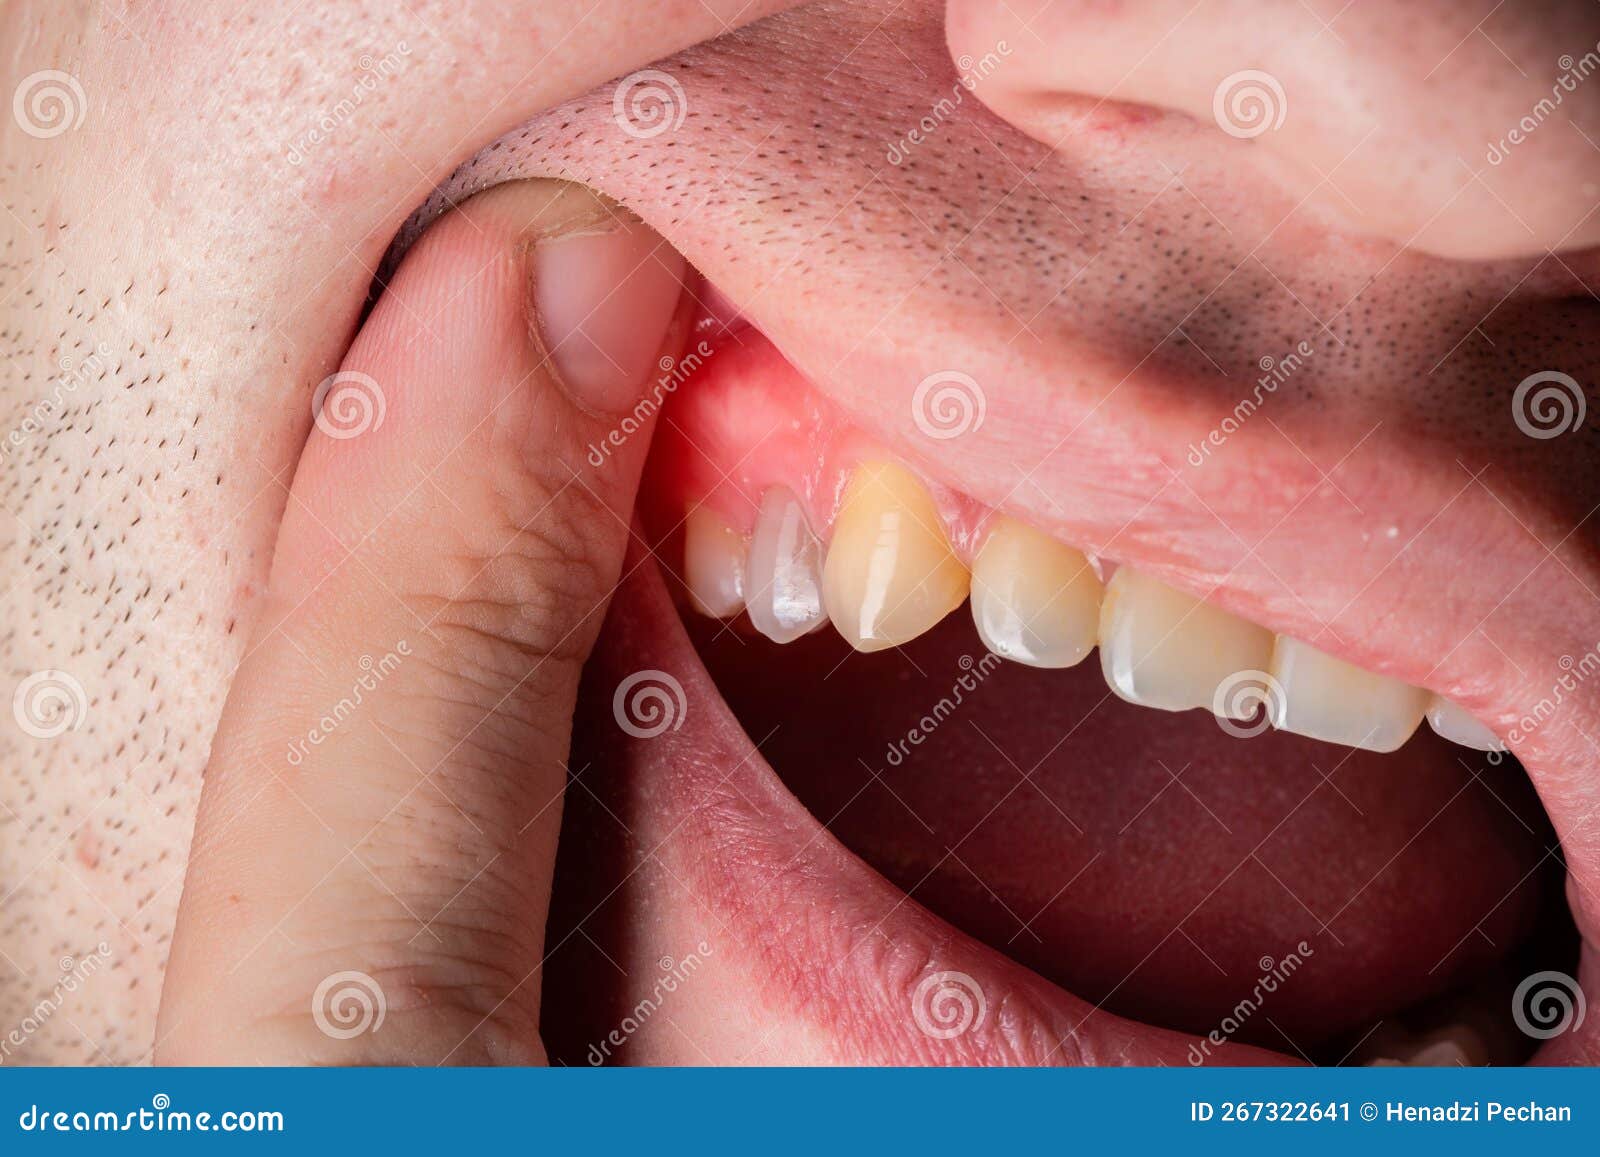 red and swollen gums in a man. gum disease gingivitis, flux and inflammation. macro